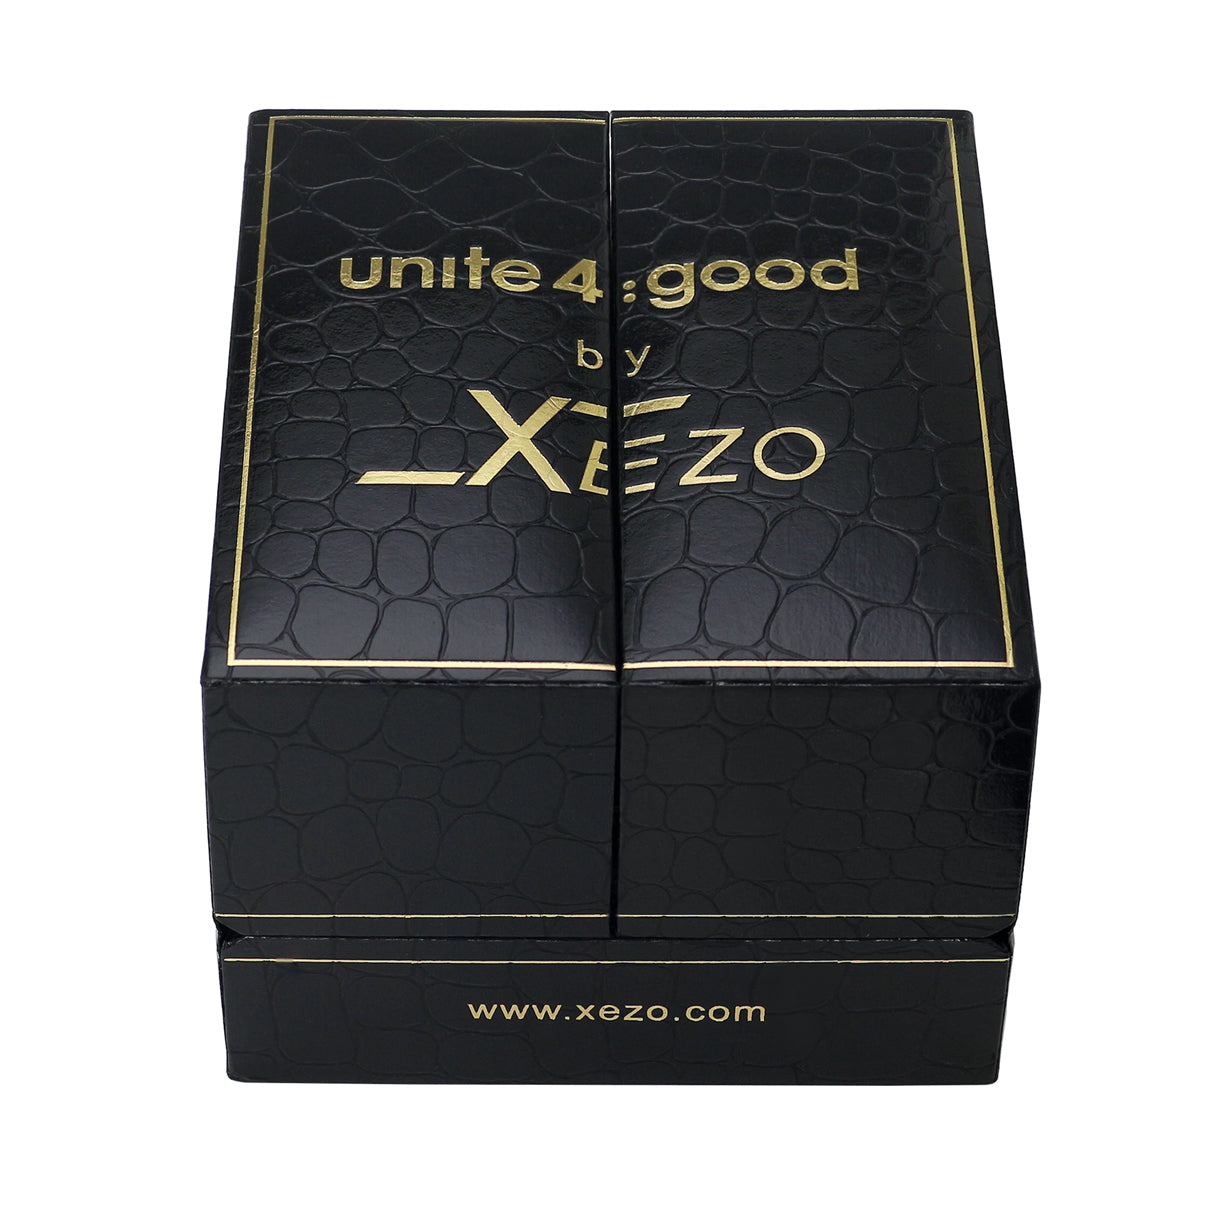 Xezo - Black gift box of the Air Commando D45-B watch with "unite 4: good by Xezo" printed on top and "www.xezo.com" printed on the front